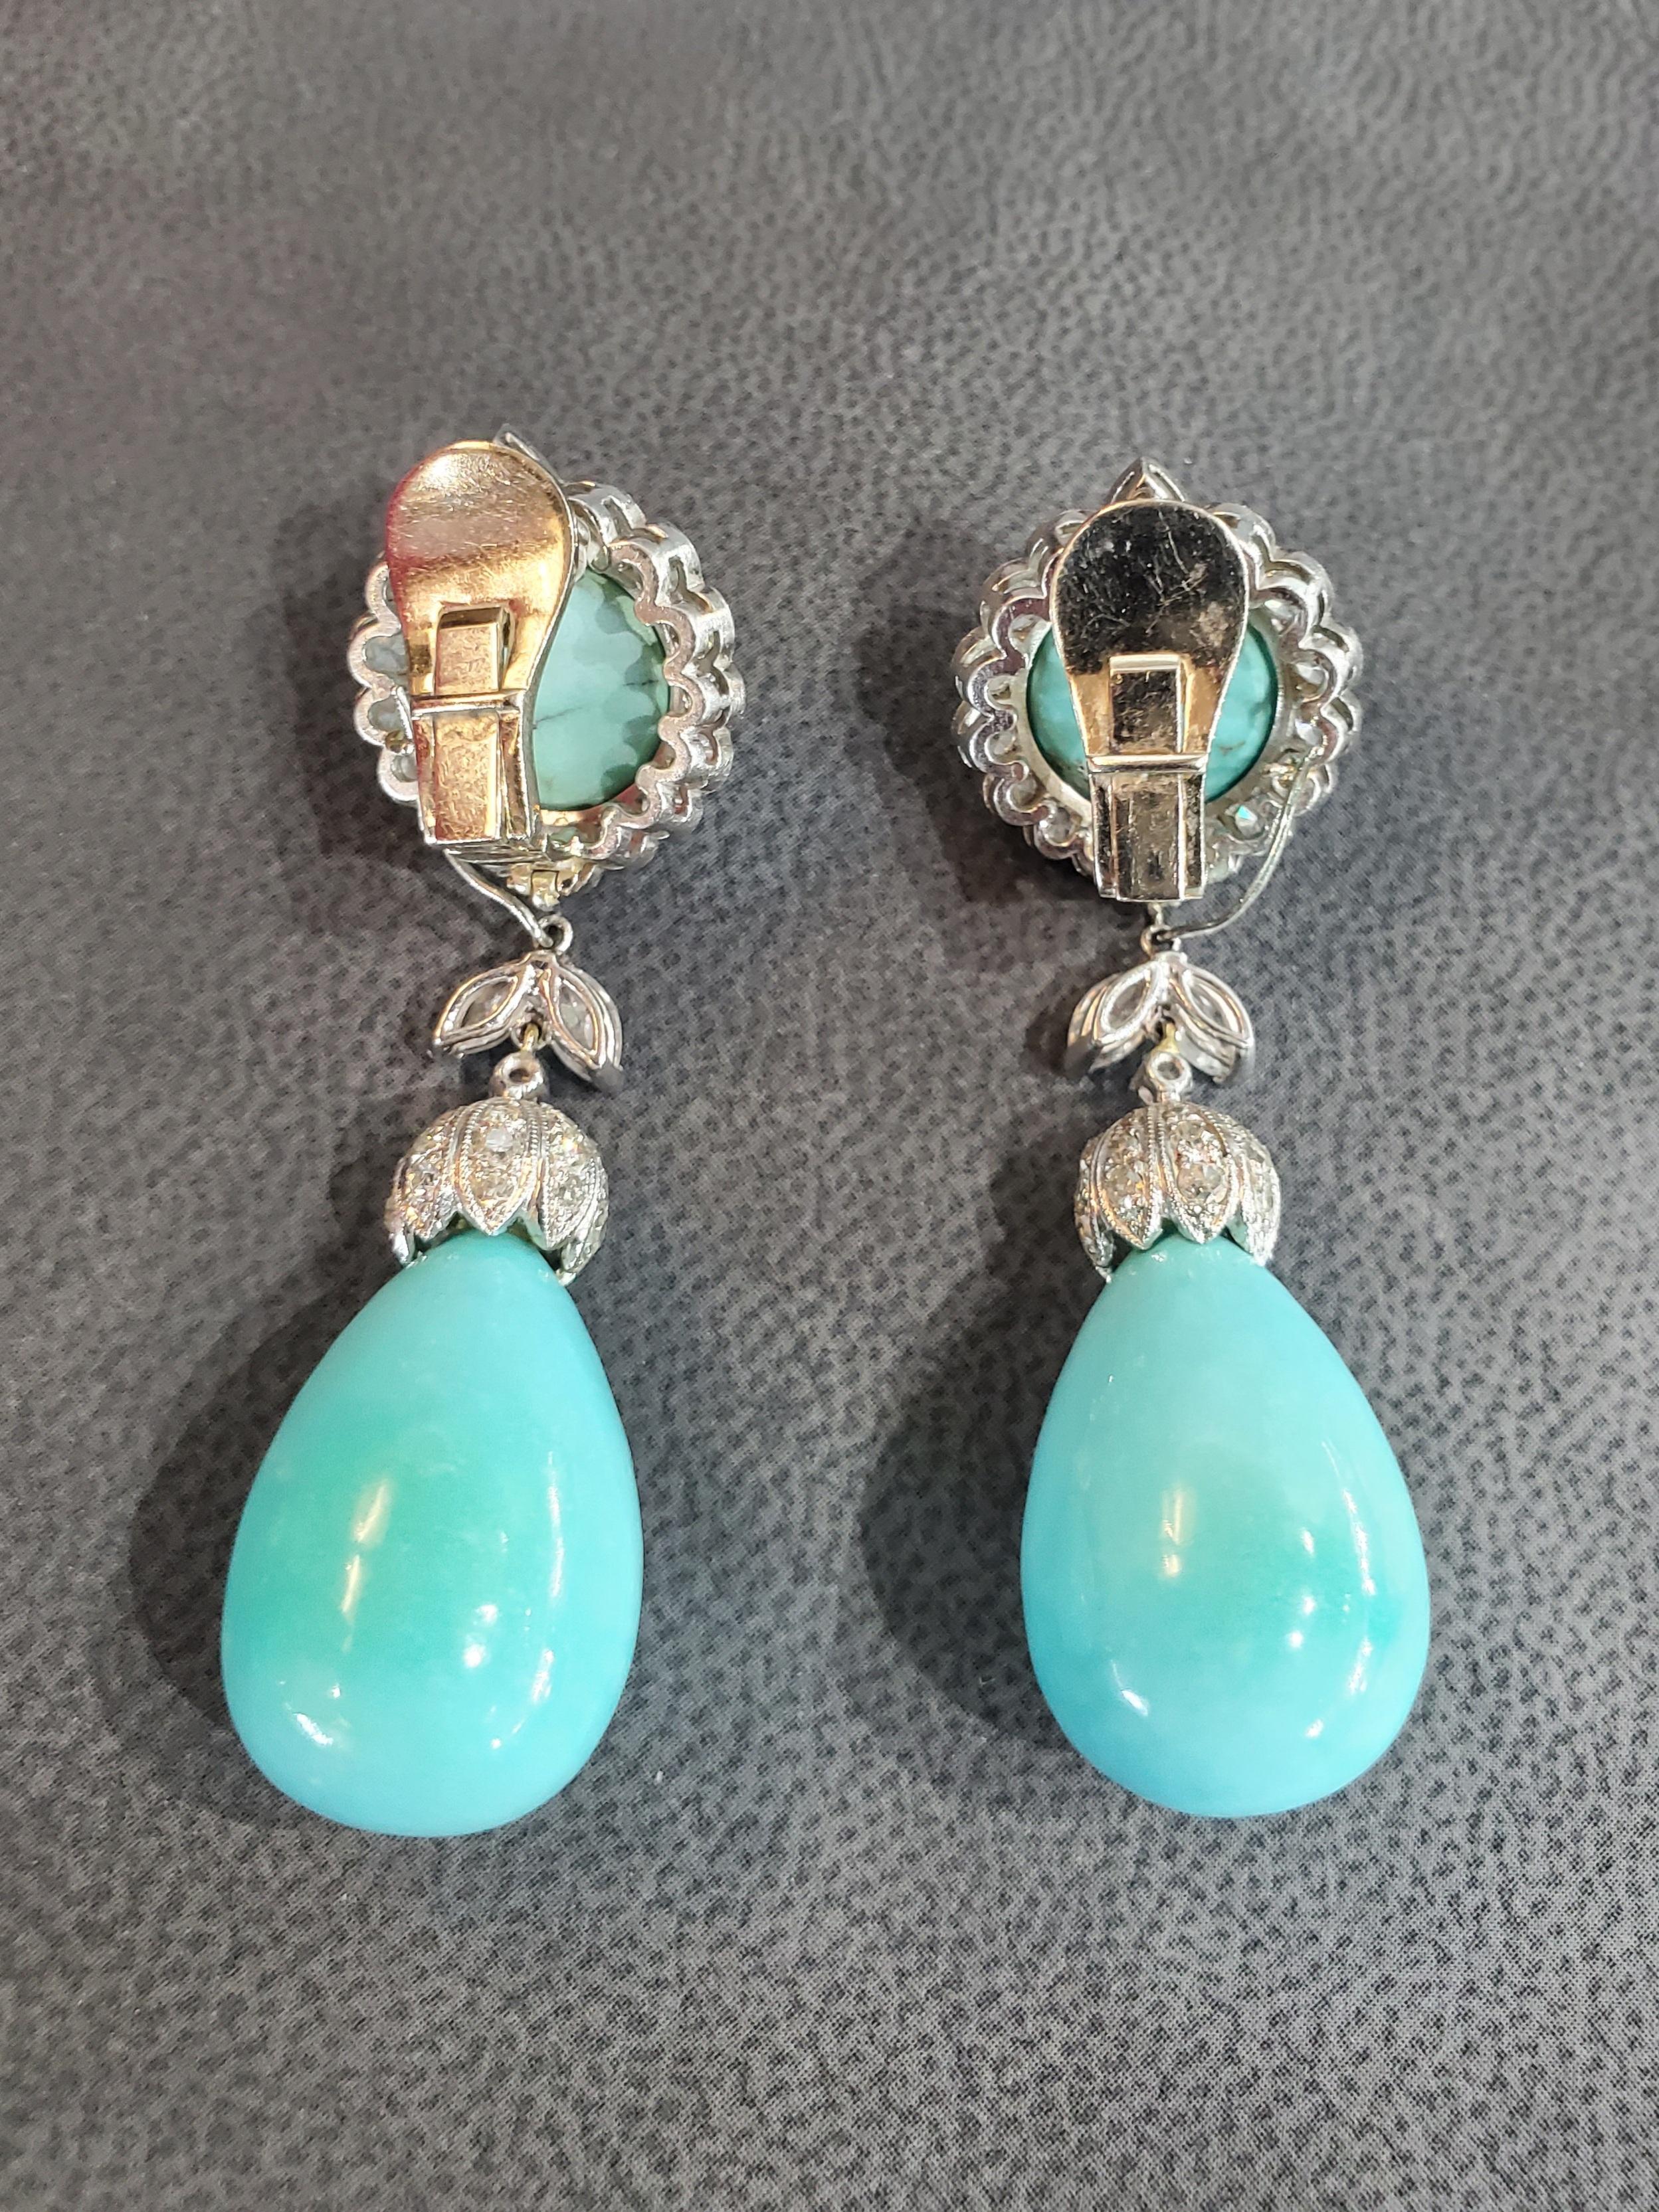 Women's Iconic Van Cleef & Arpels Turquoise & Diamond 'Day and Night' Earrings